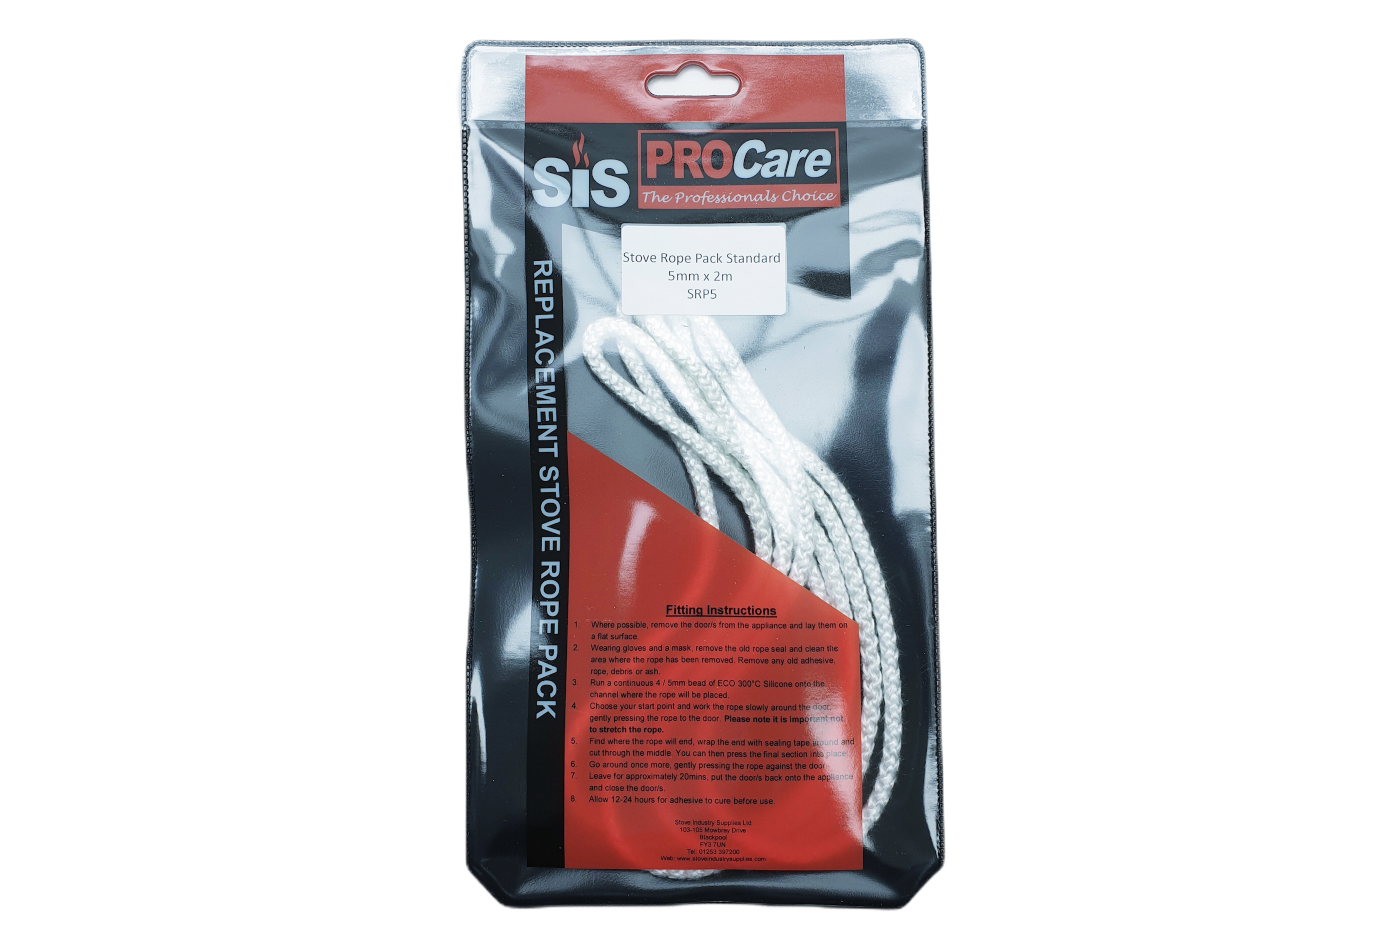 SiS Procare White 5 milimetre x 2 metre Standard Stove Rope Pack - product code SRP5